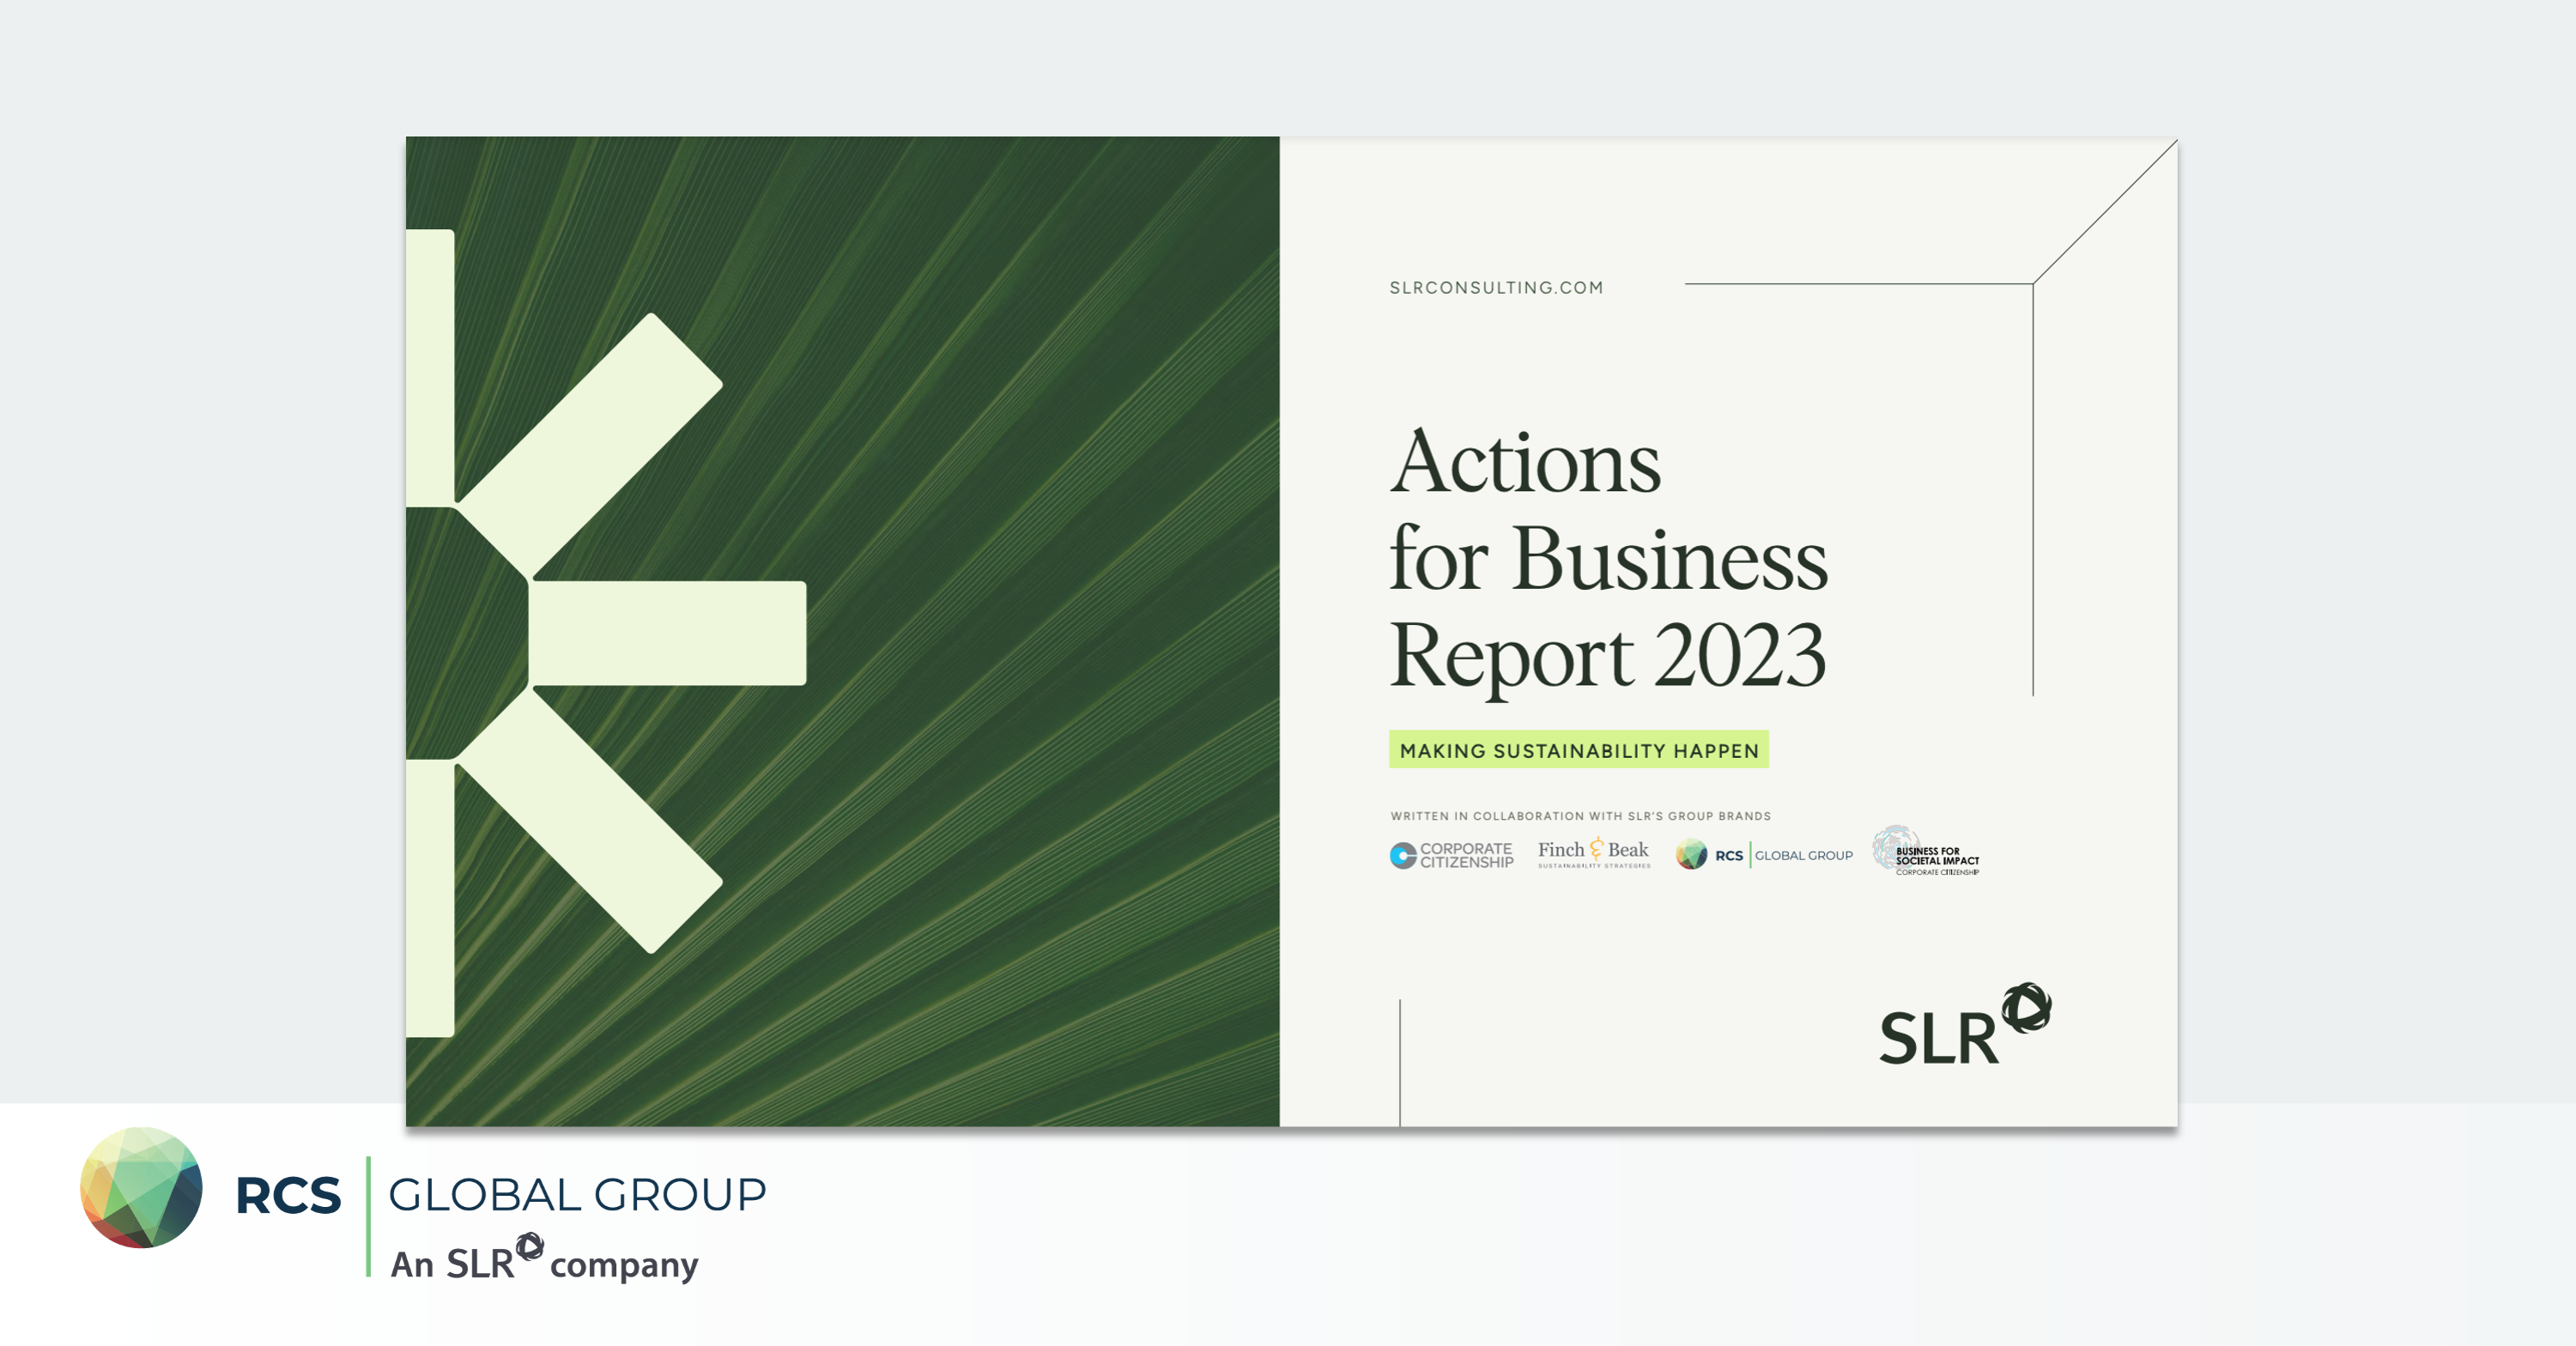 SLR’s Actions for Business Report 2023